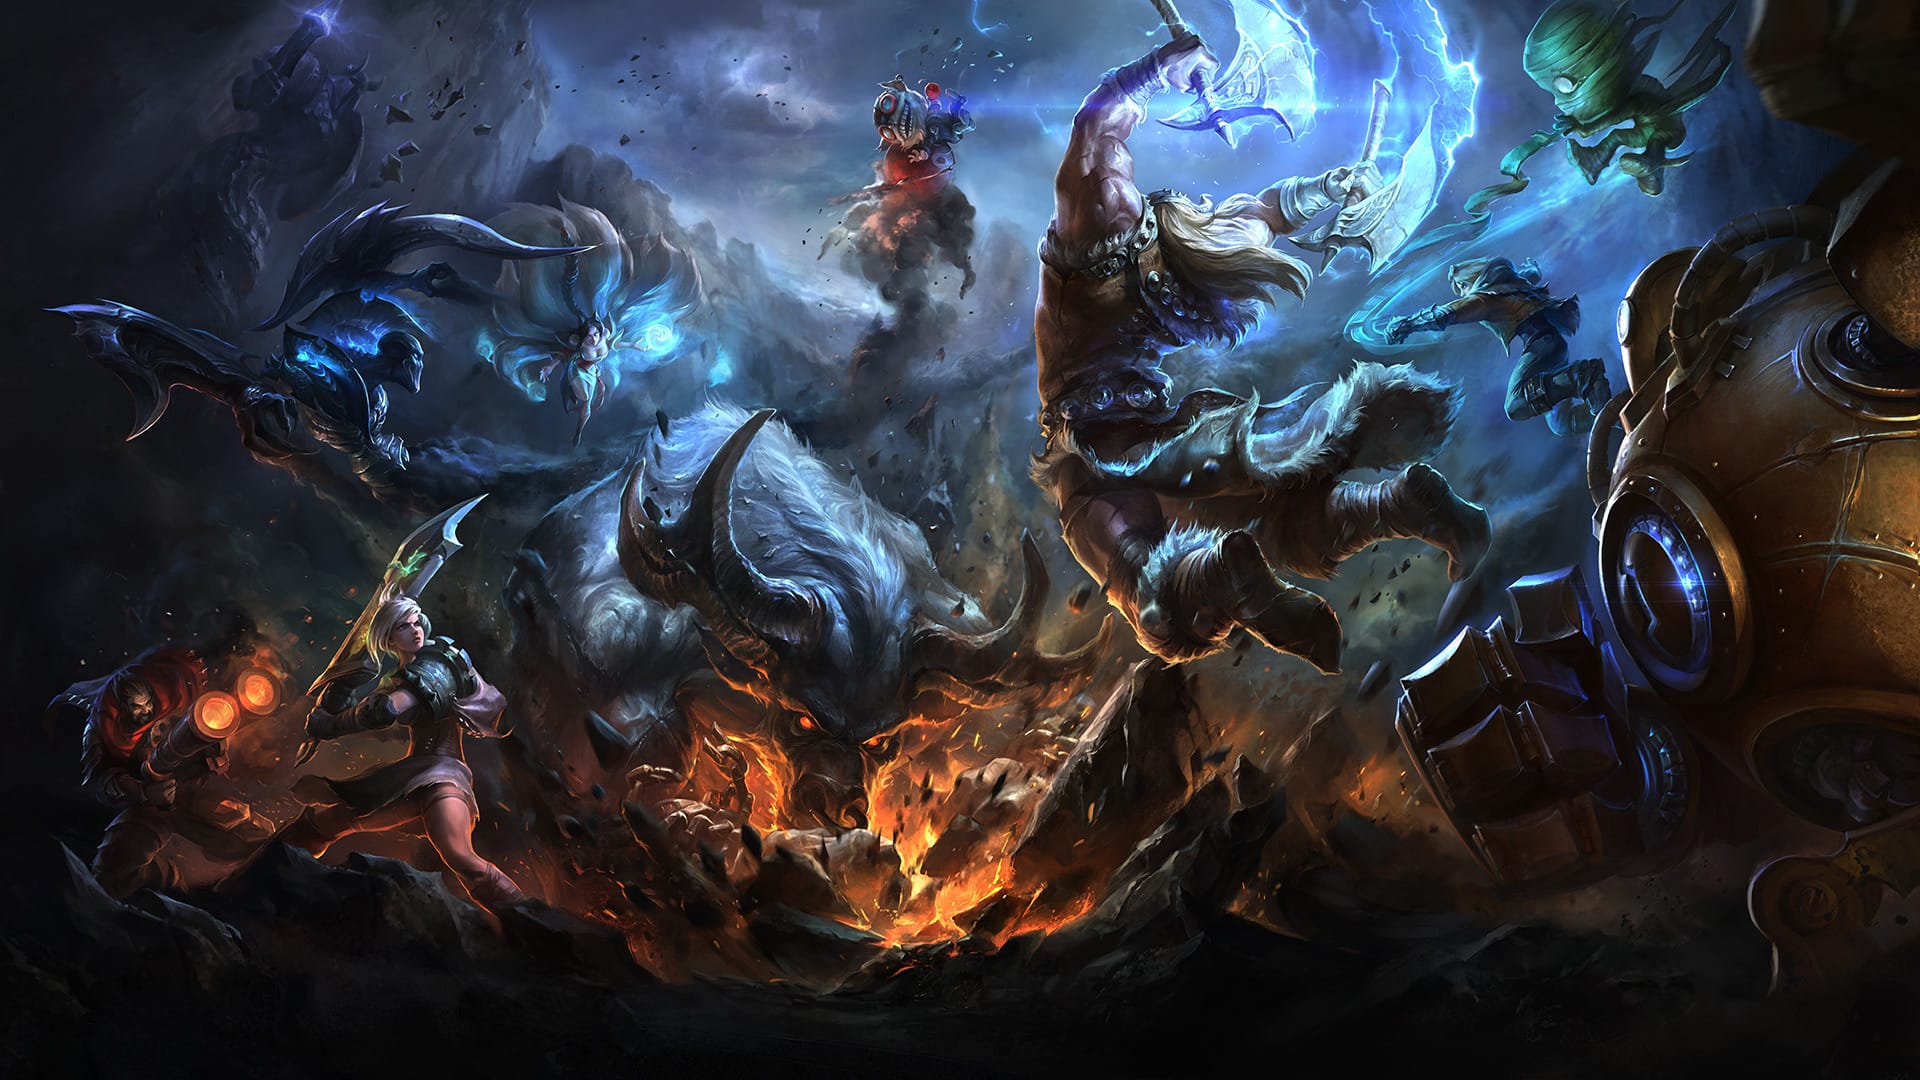 LoL Update 13.21 Patch Notes: Release Date, Champion Buffs And